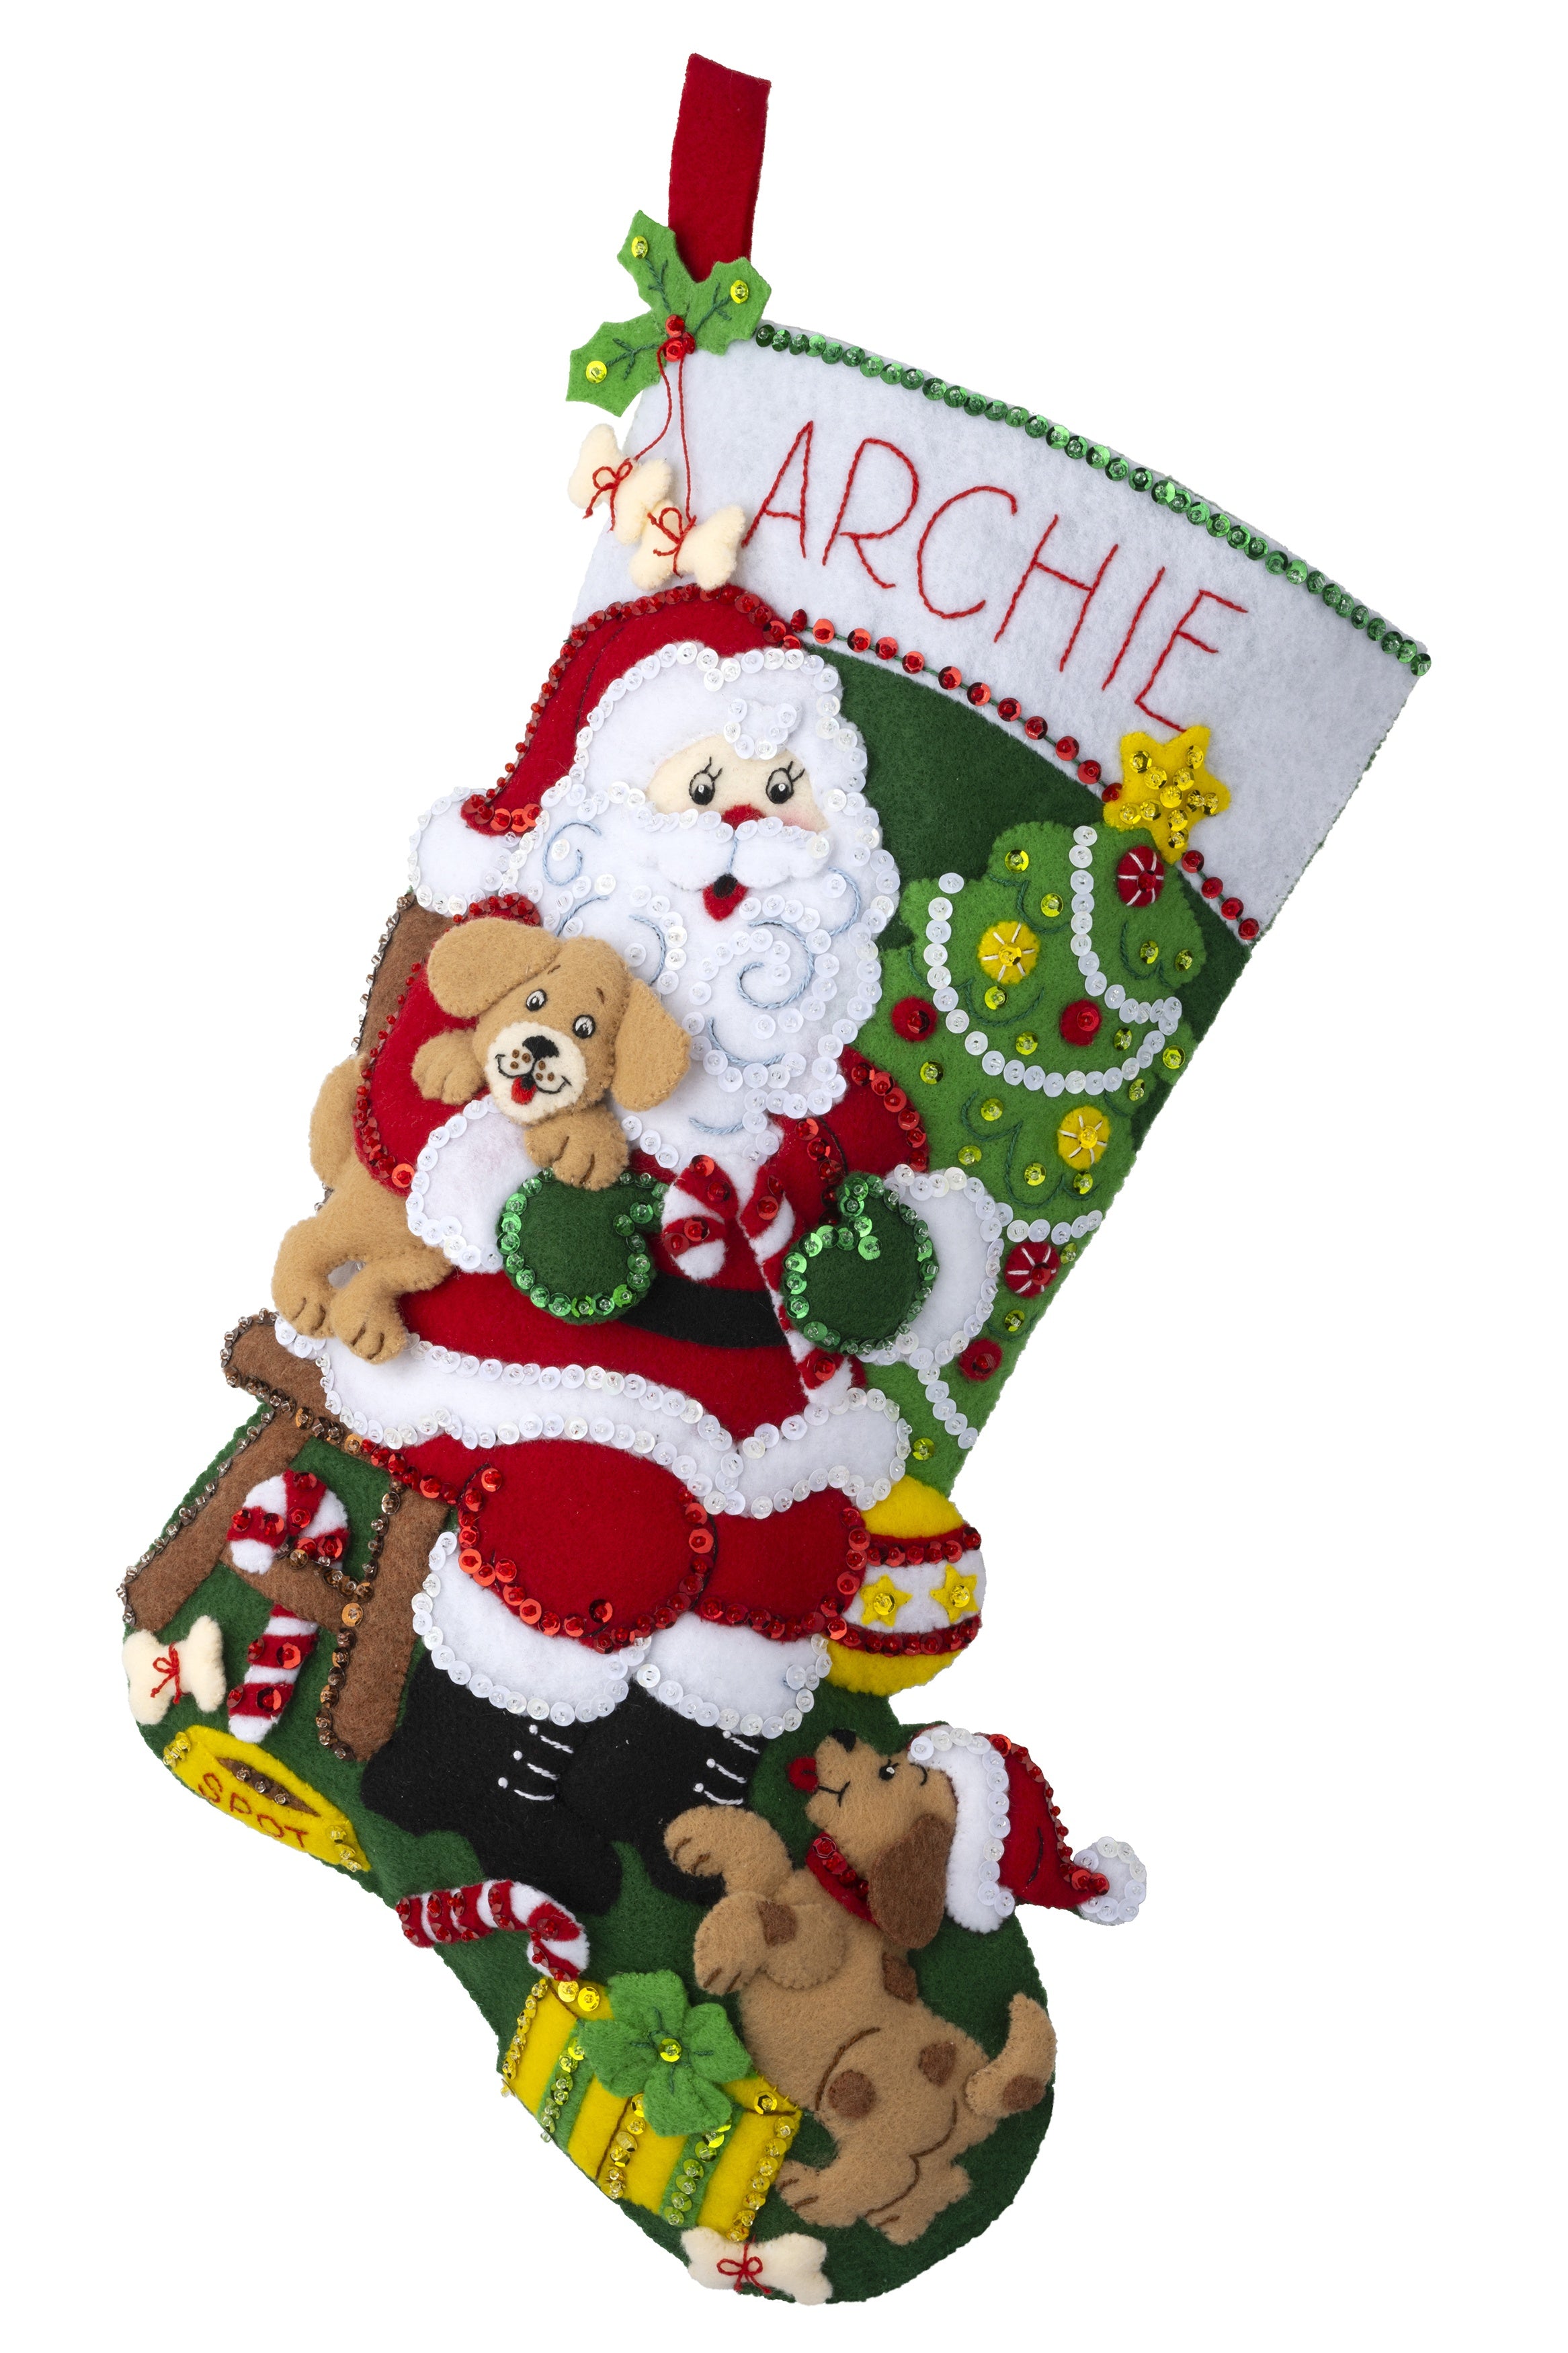 Bucilla felt christmas stocking kit. Design features santa sitting a chair holding a puppy while another puppy runs up to his knees. 